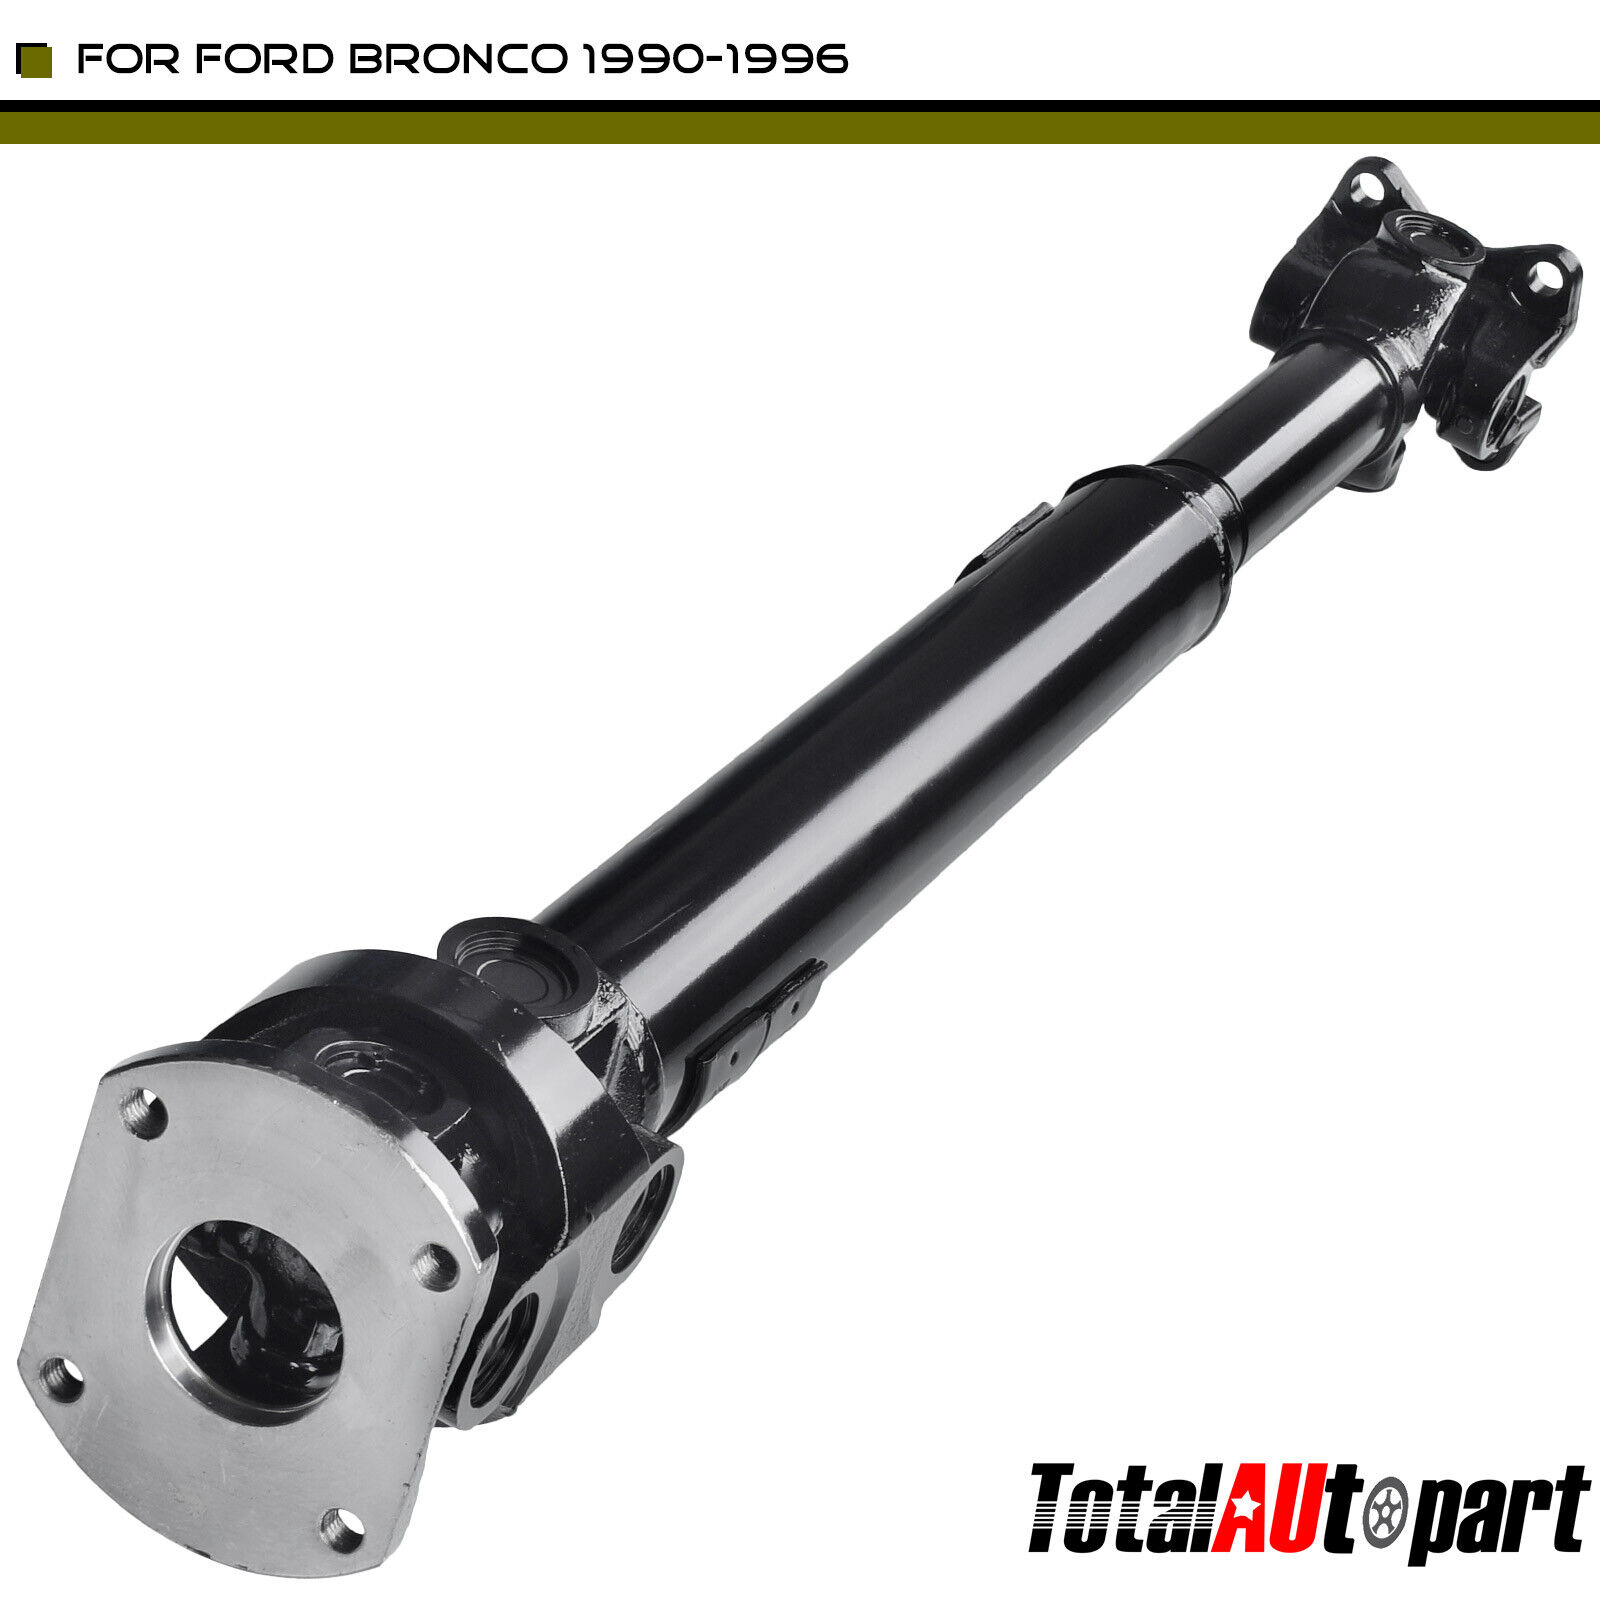 New Rear Drive Shaft Assembly for Ford Bronco 1990-1996 L6 4.9L V8 5.0L SUV 4WD